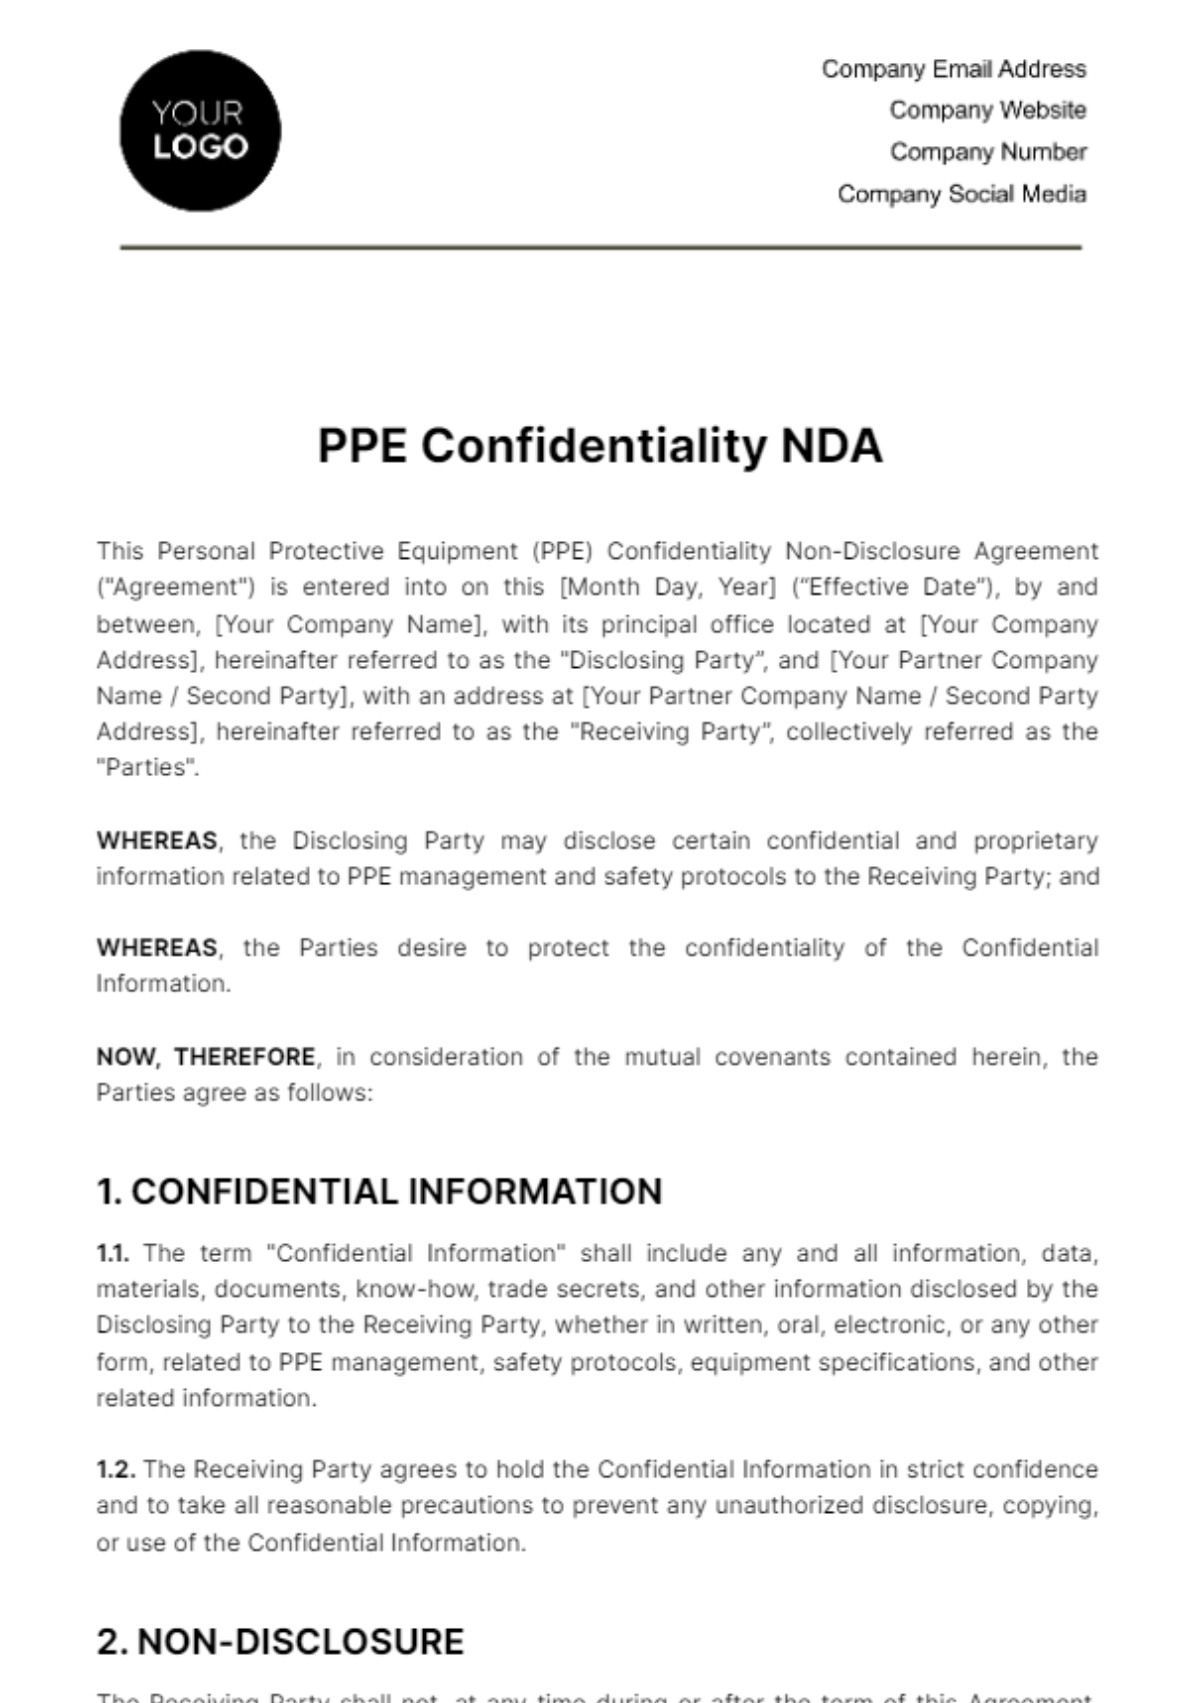 PPE Confidentiality NDA Template